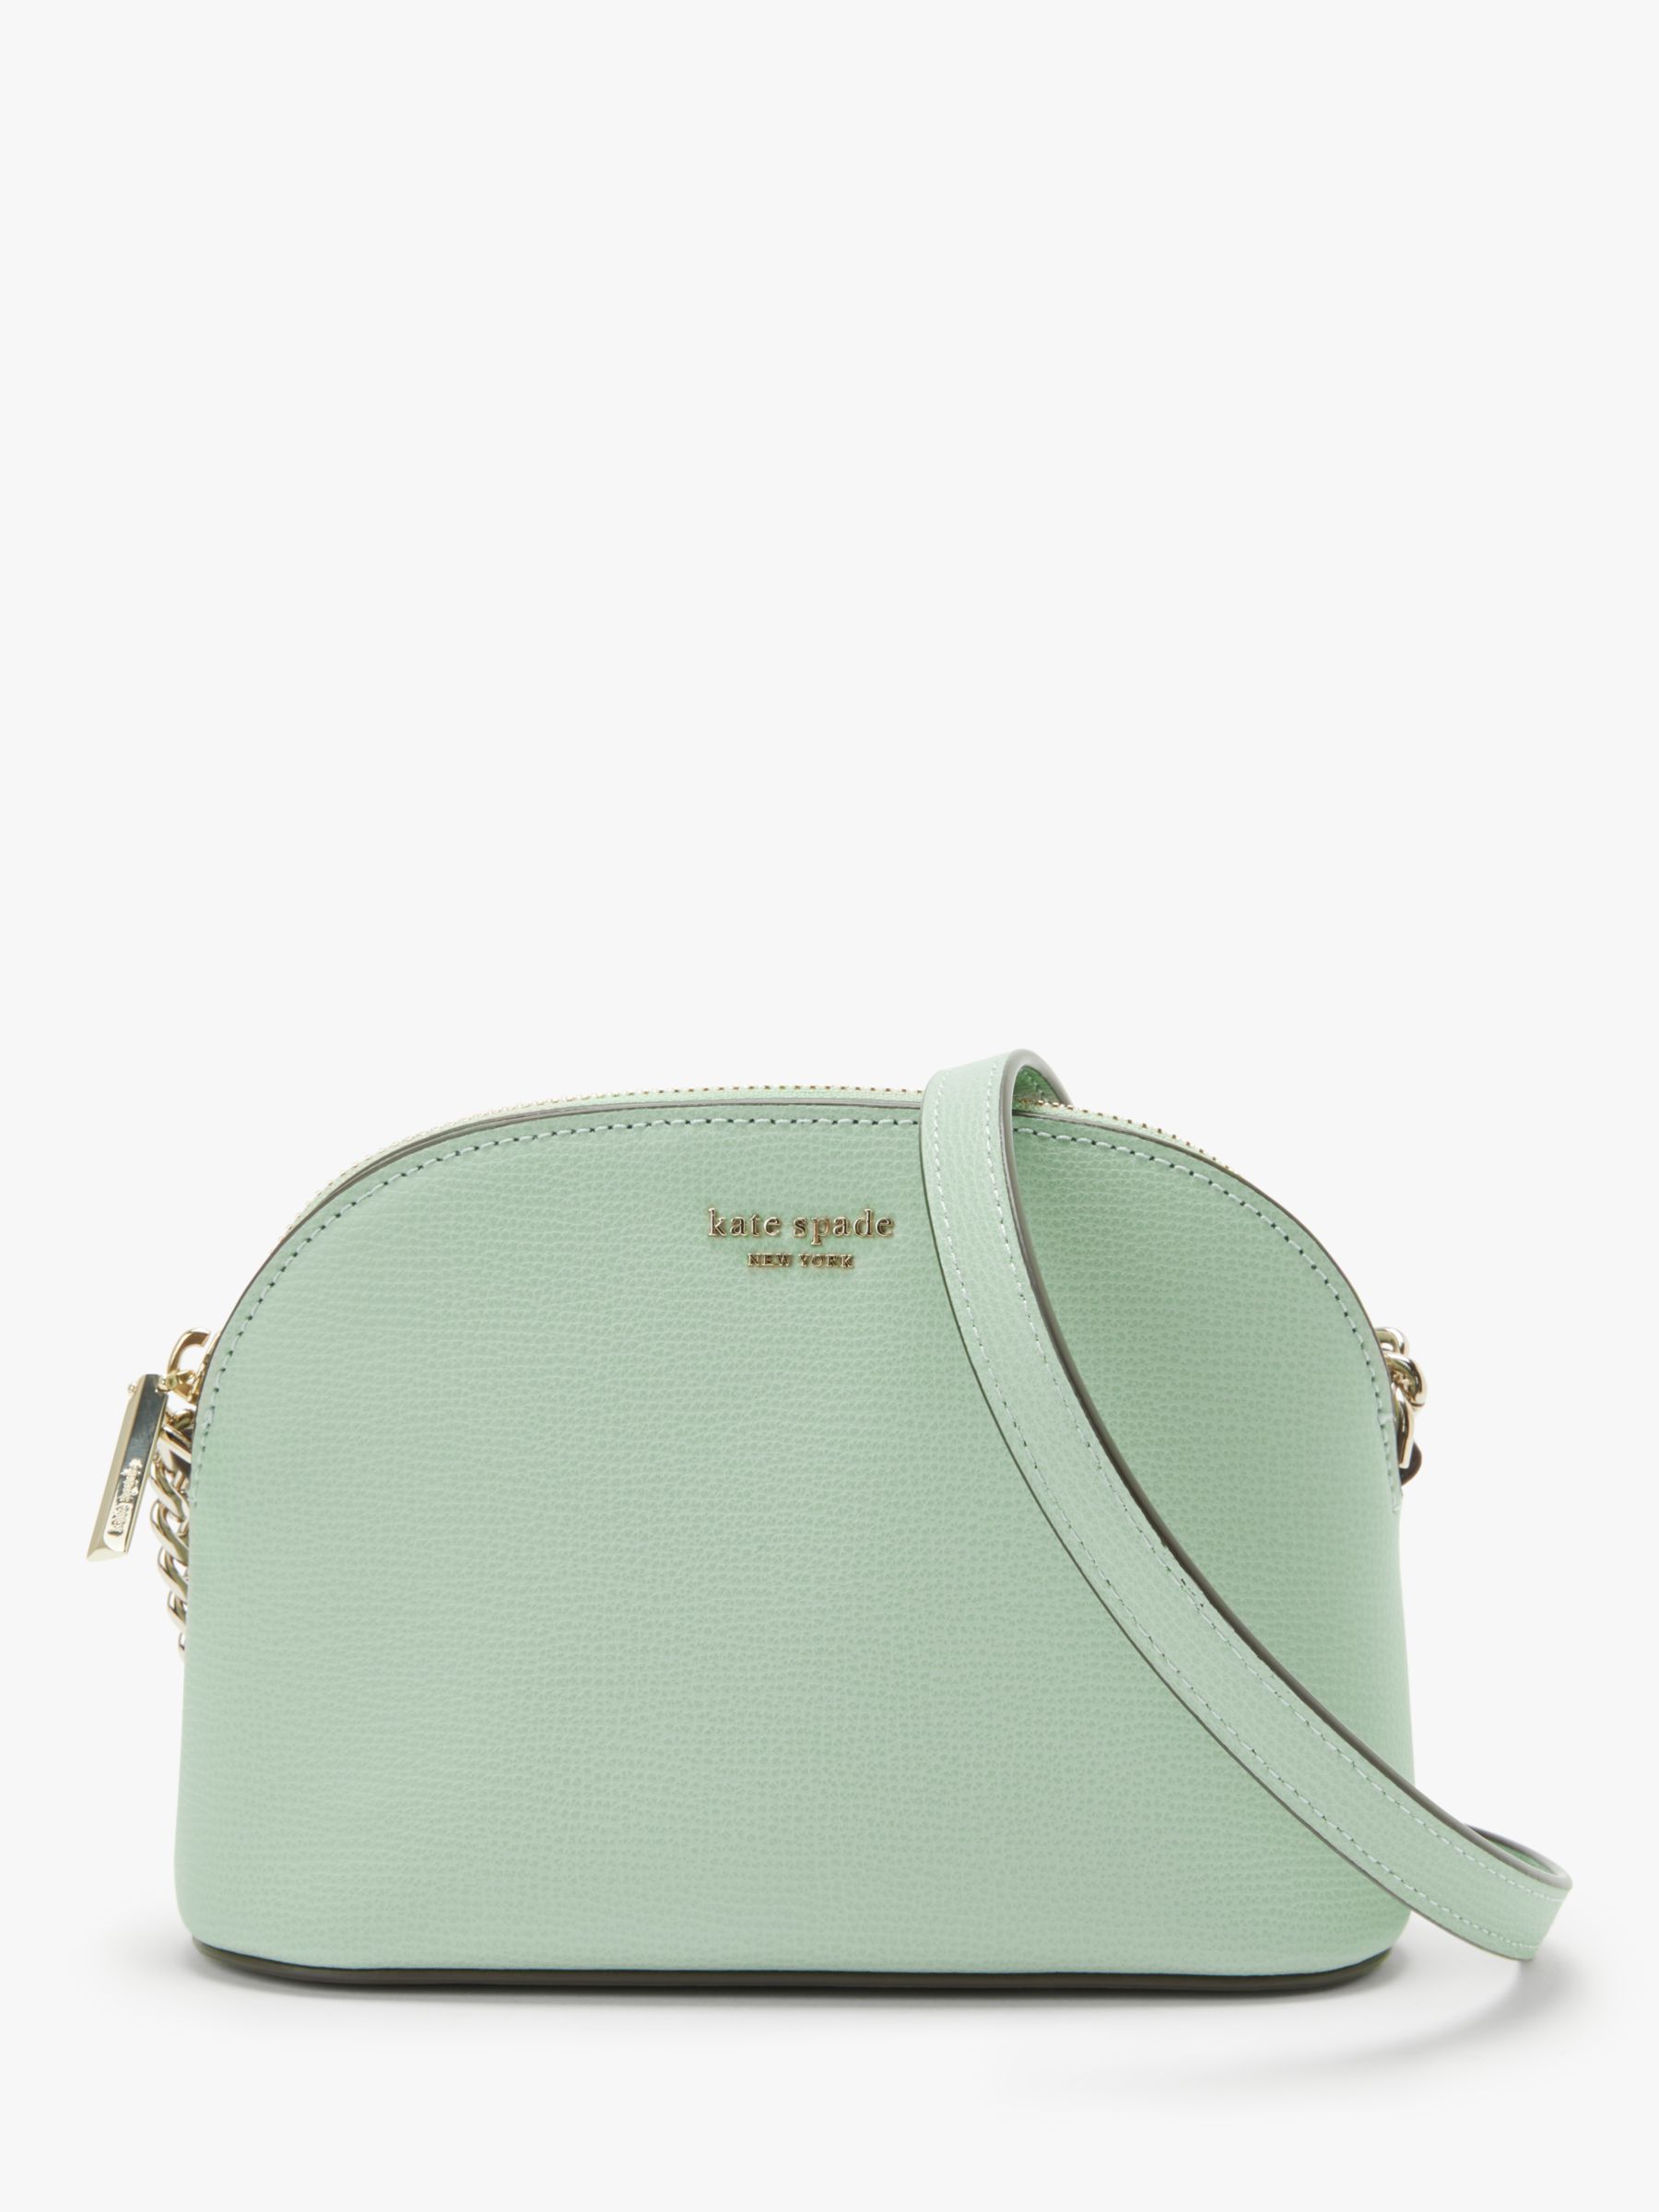 kate spade new york Sylvia Leather Small Dome Cross Body Bag at John Lewis & Partners